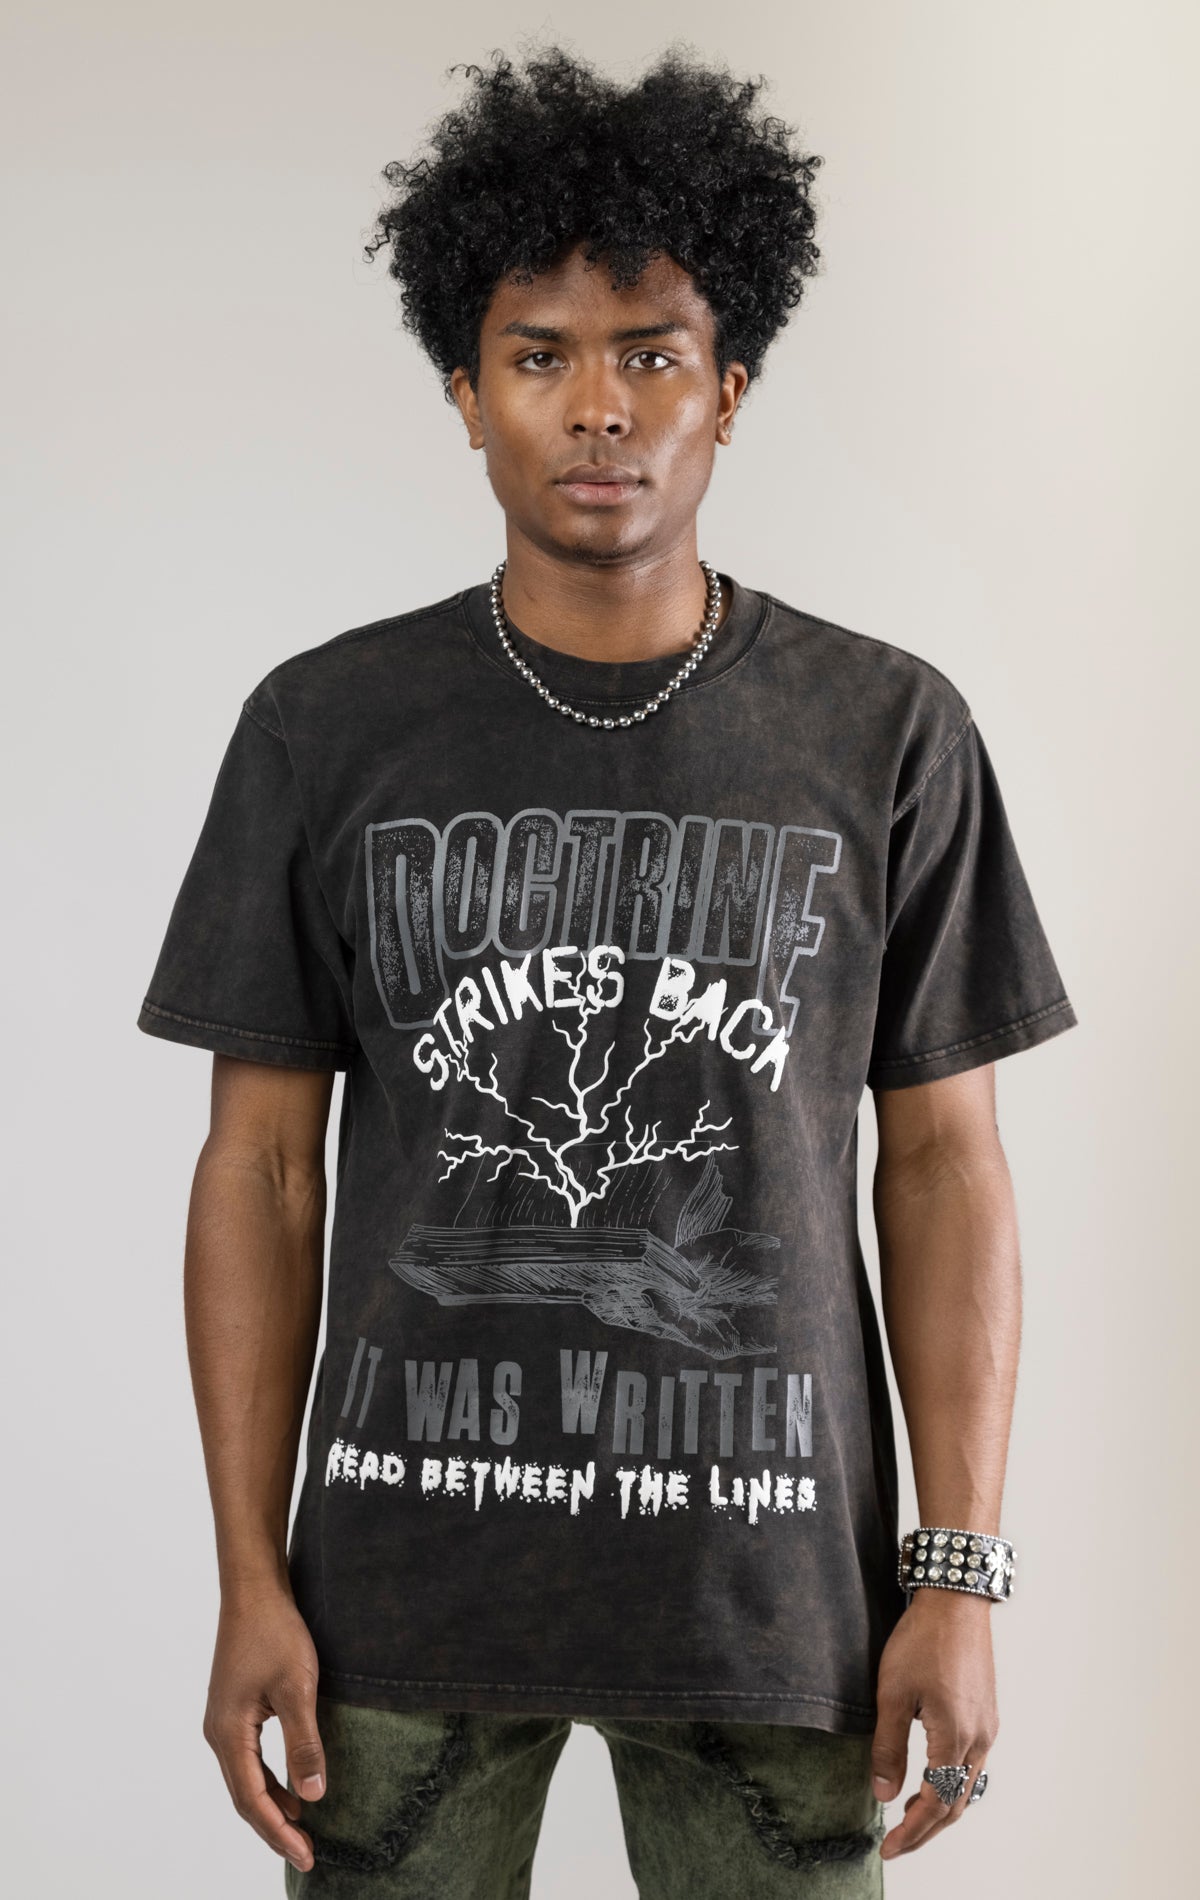 A DOCTRINE STRIKE BACK T-shirt featuring a high-definition digital graphic print across the front. The shirt is made from 100% cotton and has a vintage-washed look.